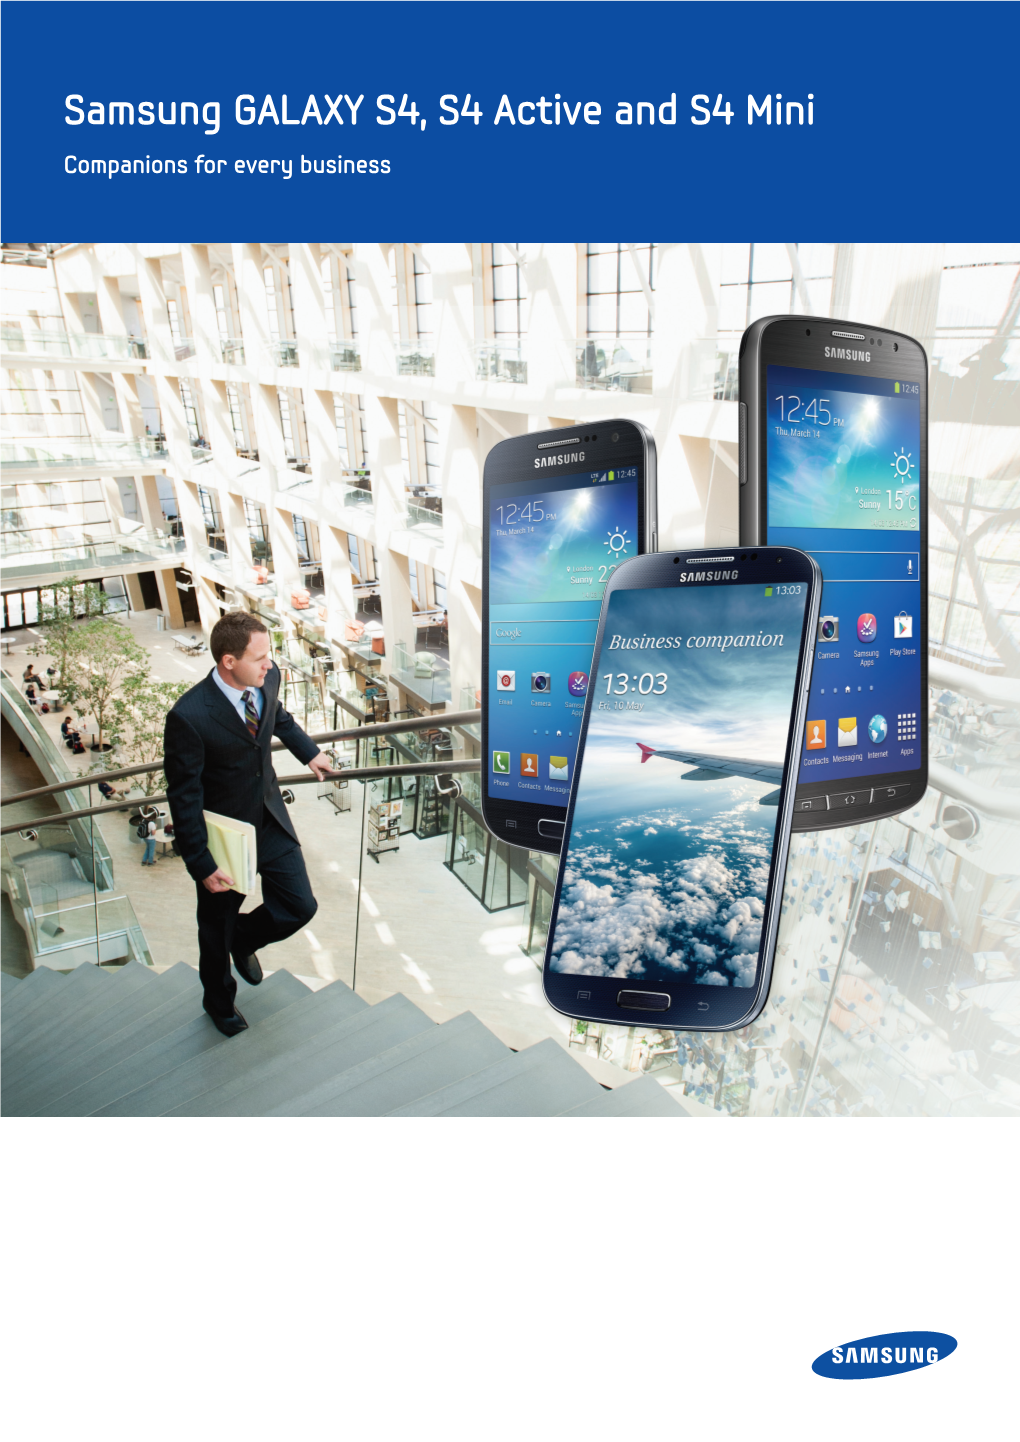 Samsung GALAXY S4, S4 Active and S4 Mini Companions for Every Business the Optimum Choice for Work and Life